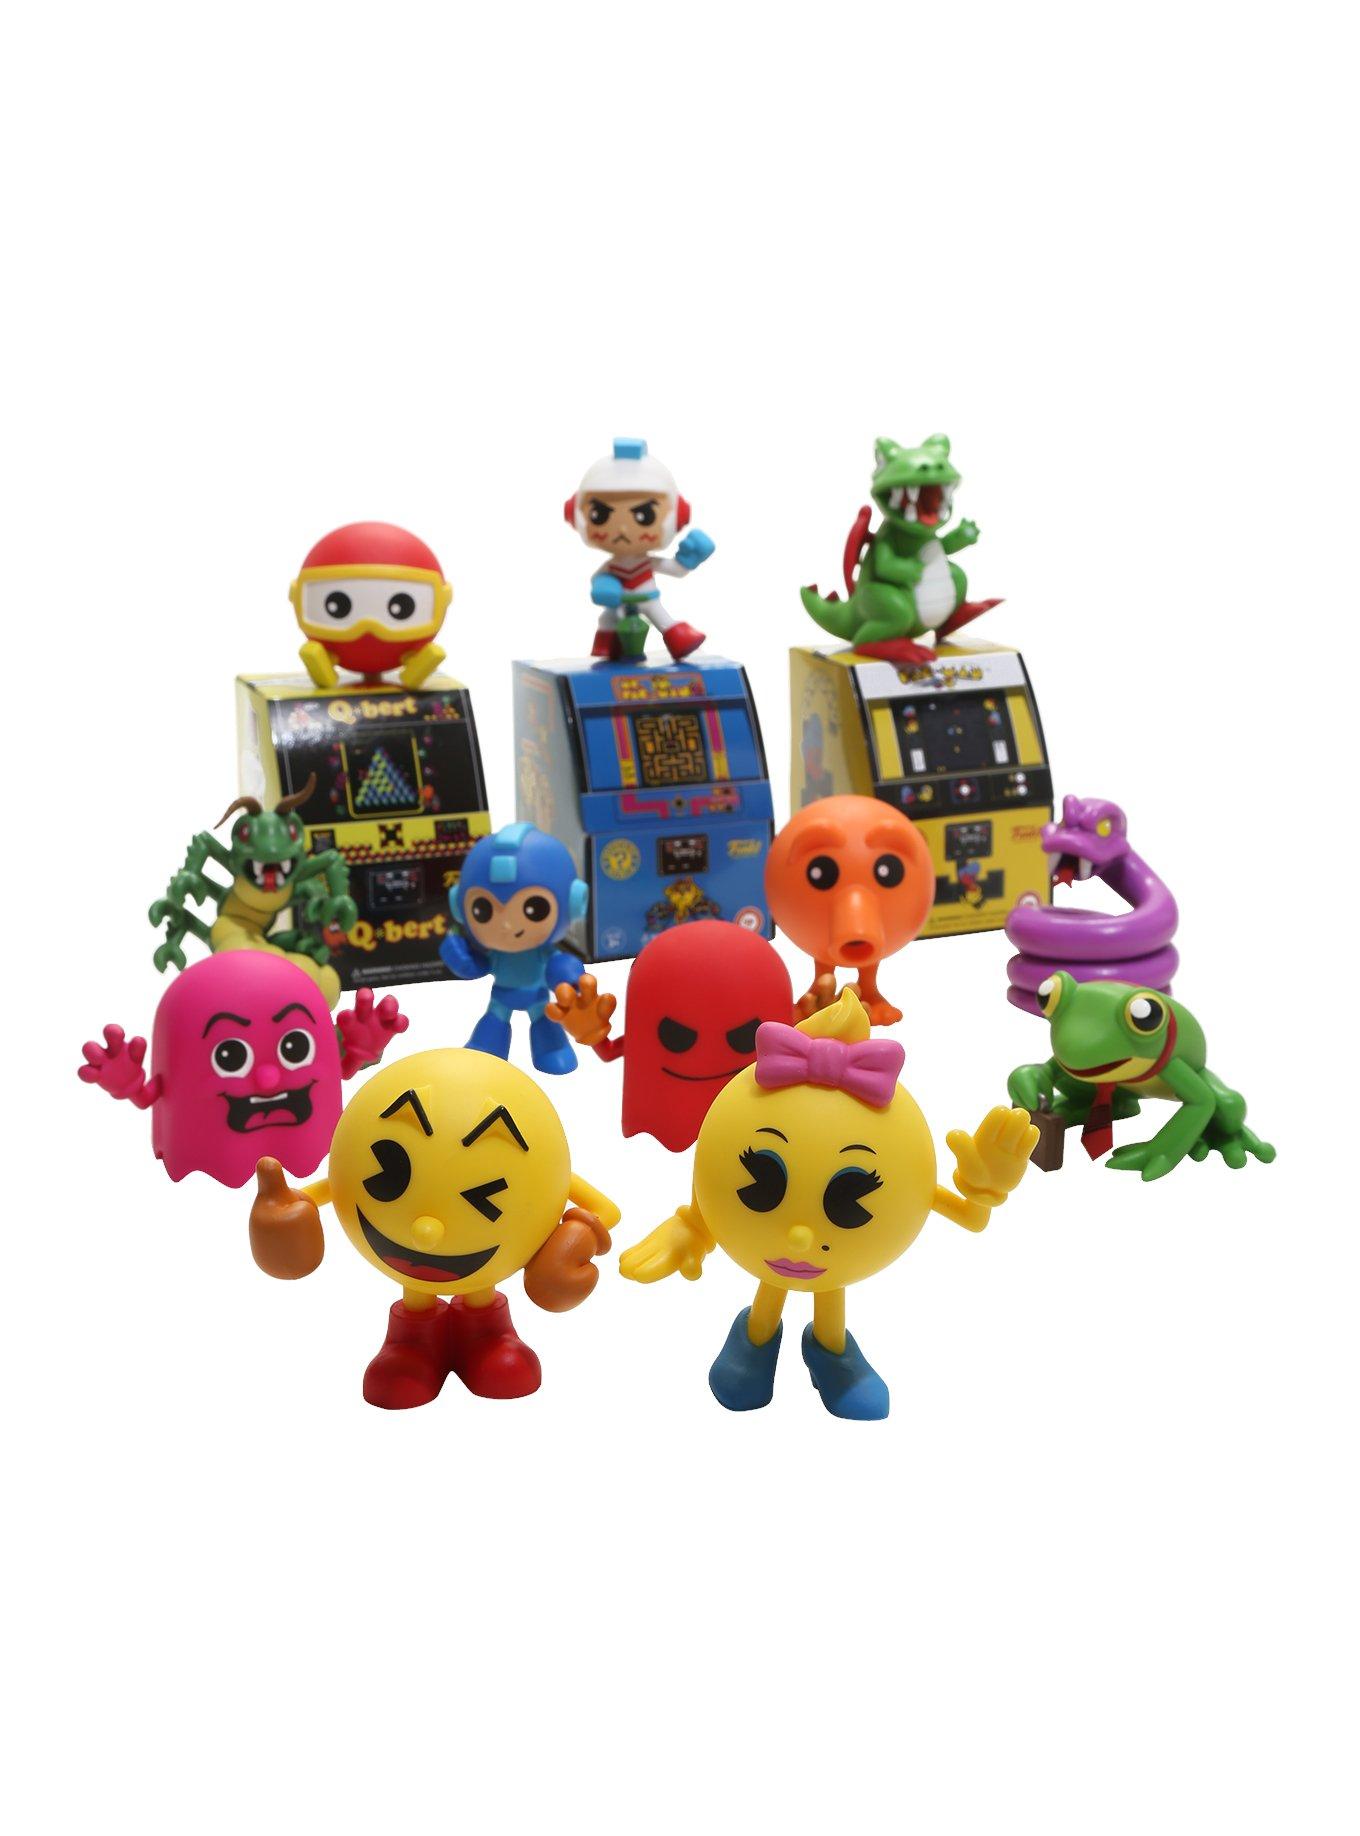 World's Smallest Blind Box Classic Mini Collectible Toys, Hot Topic